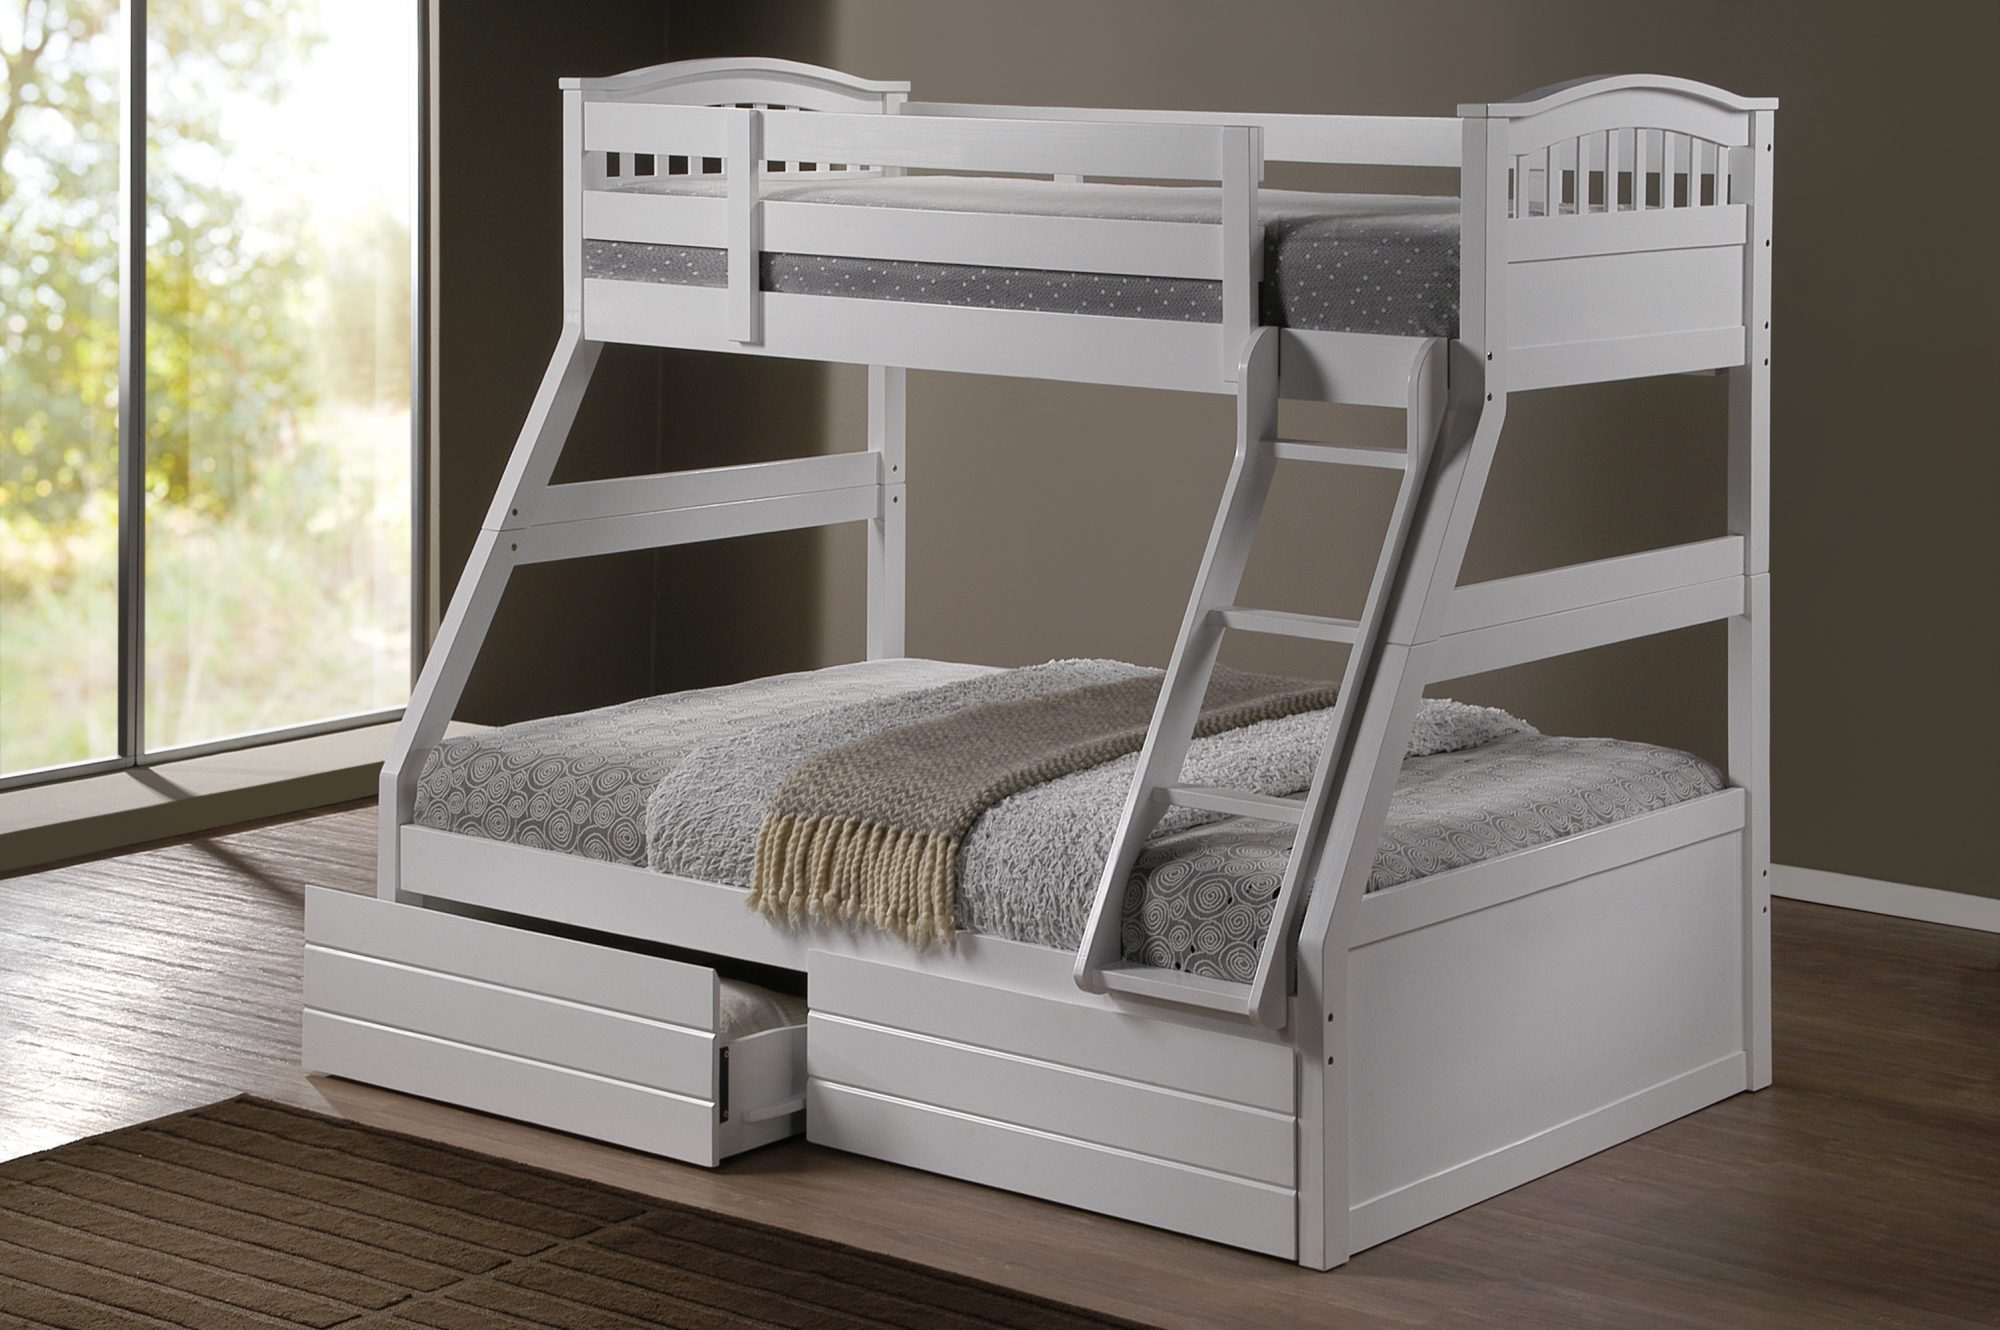 Ashley White Duo Double Single Bunk, Ashley Bunk Bed With Stairs